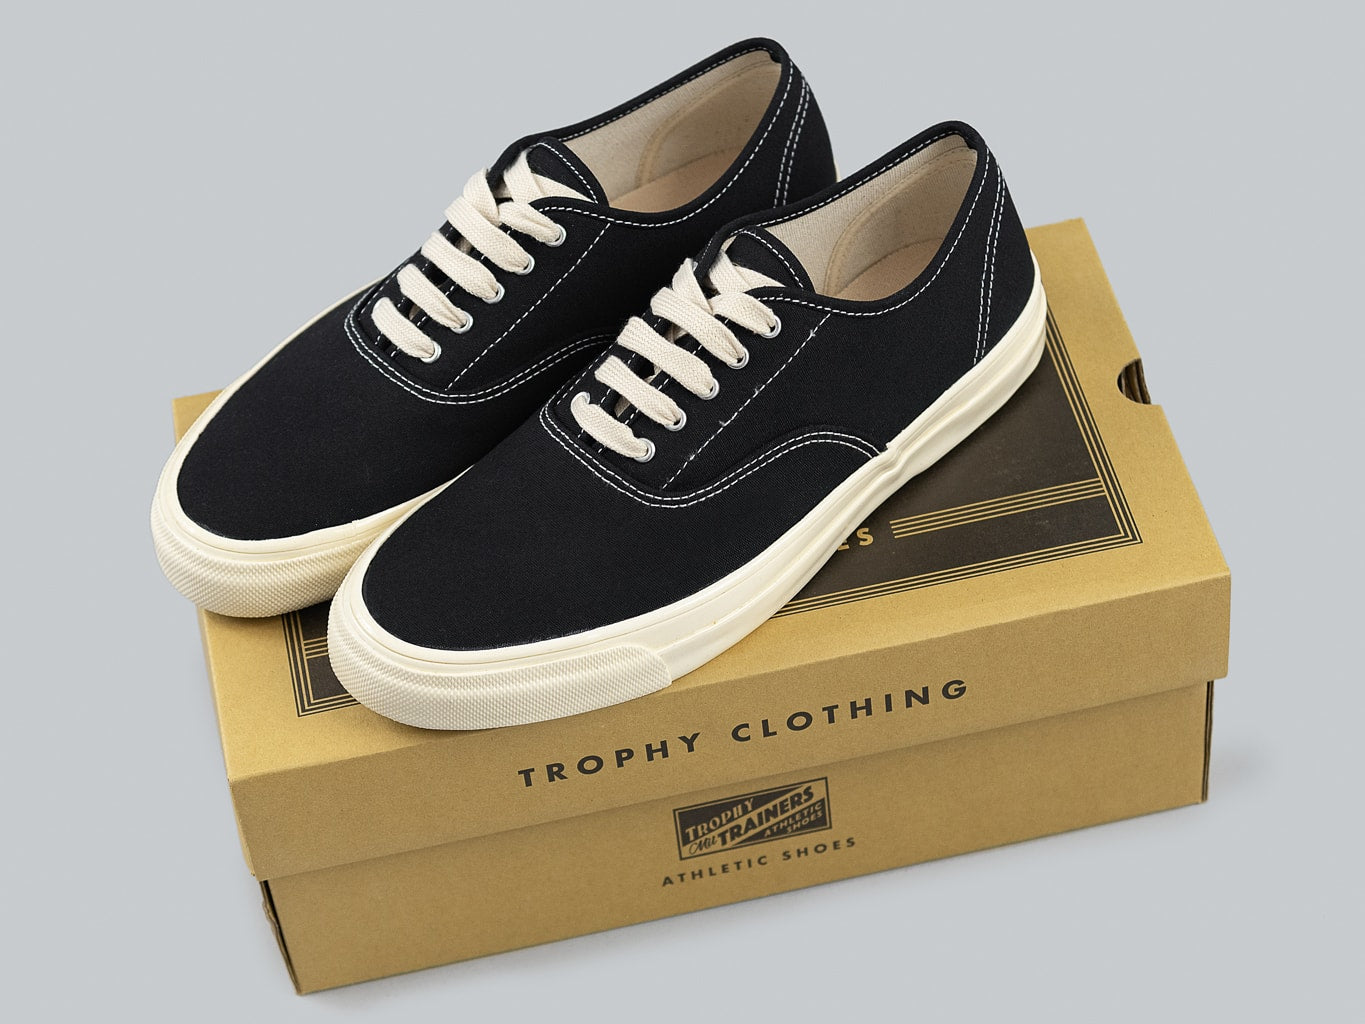 Trophy clothing mil boat shoes black cream sneaker box